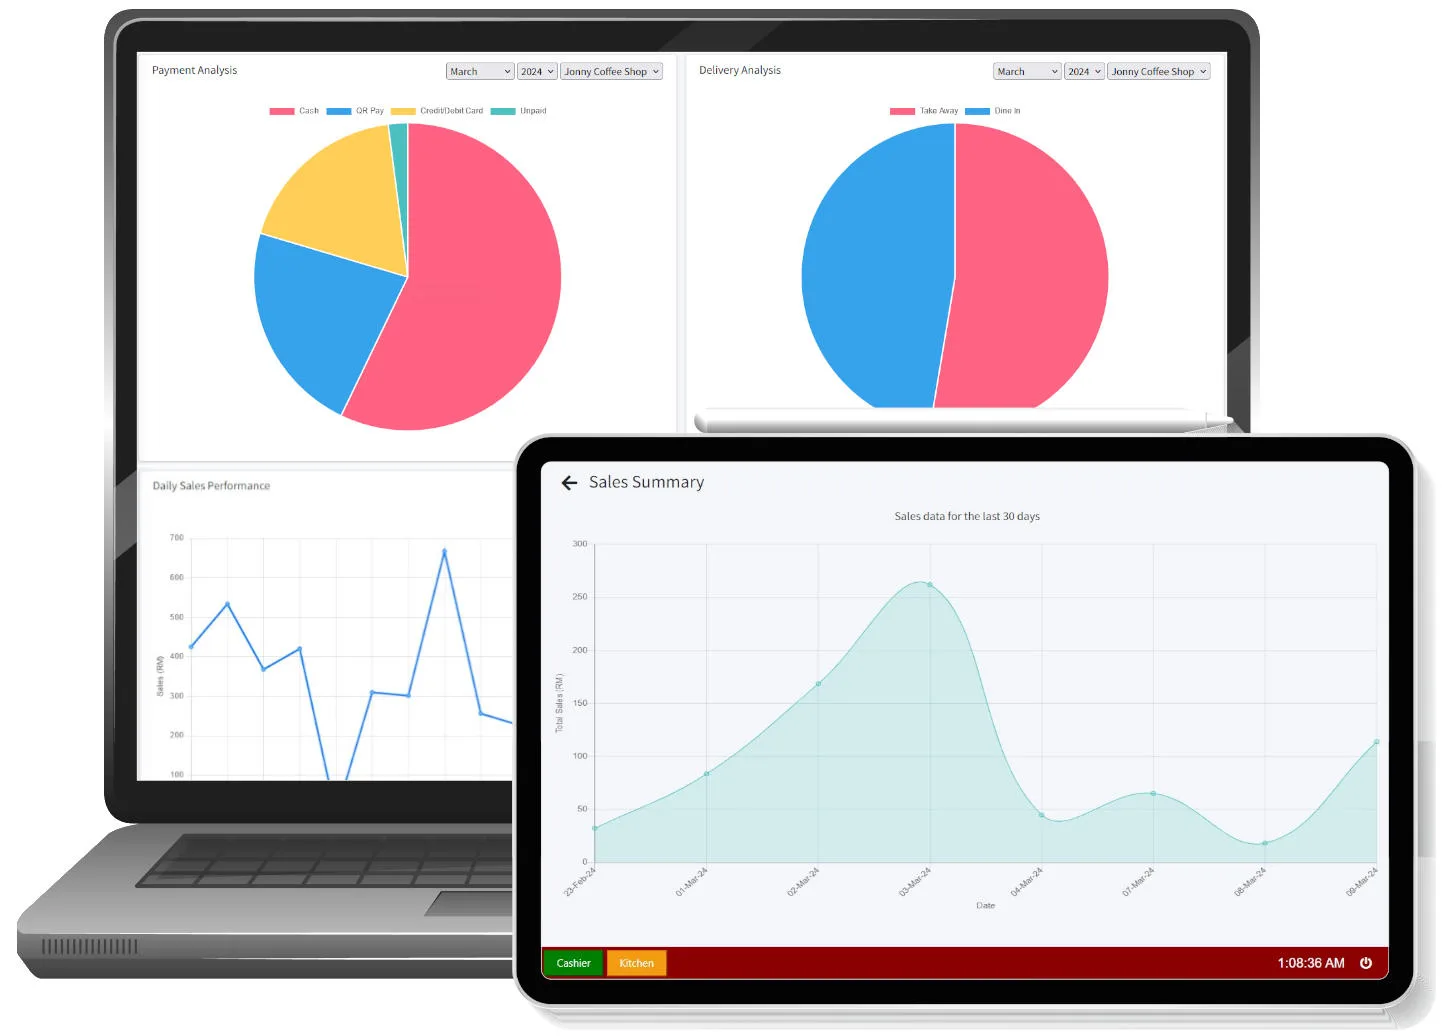 NoQue Business intelligence and reporting